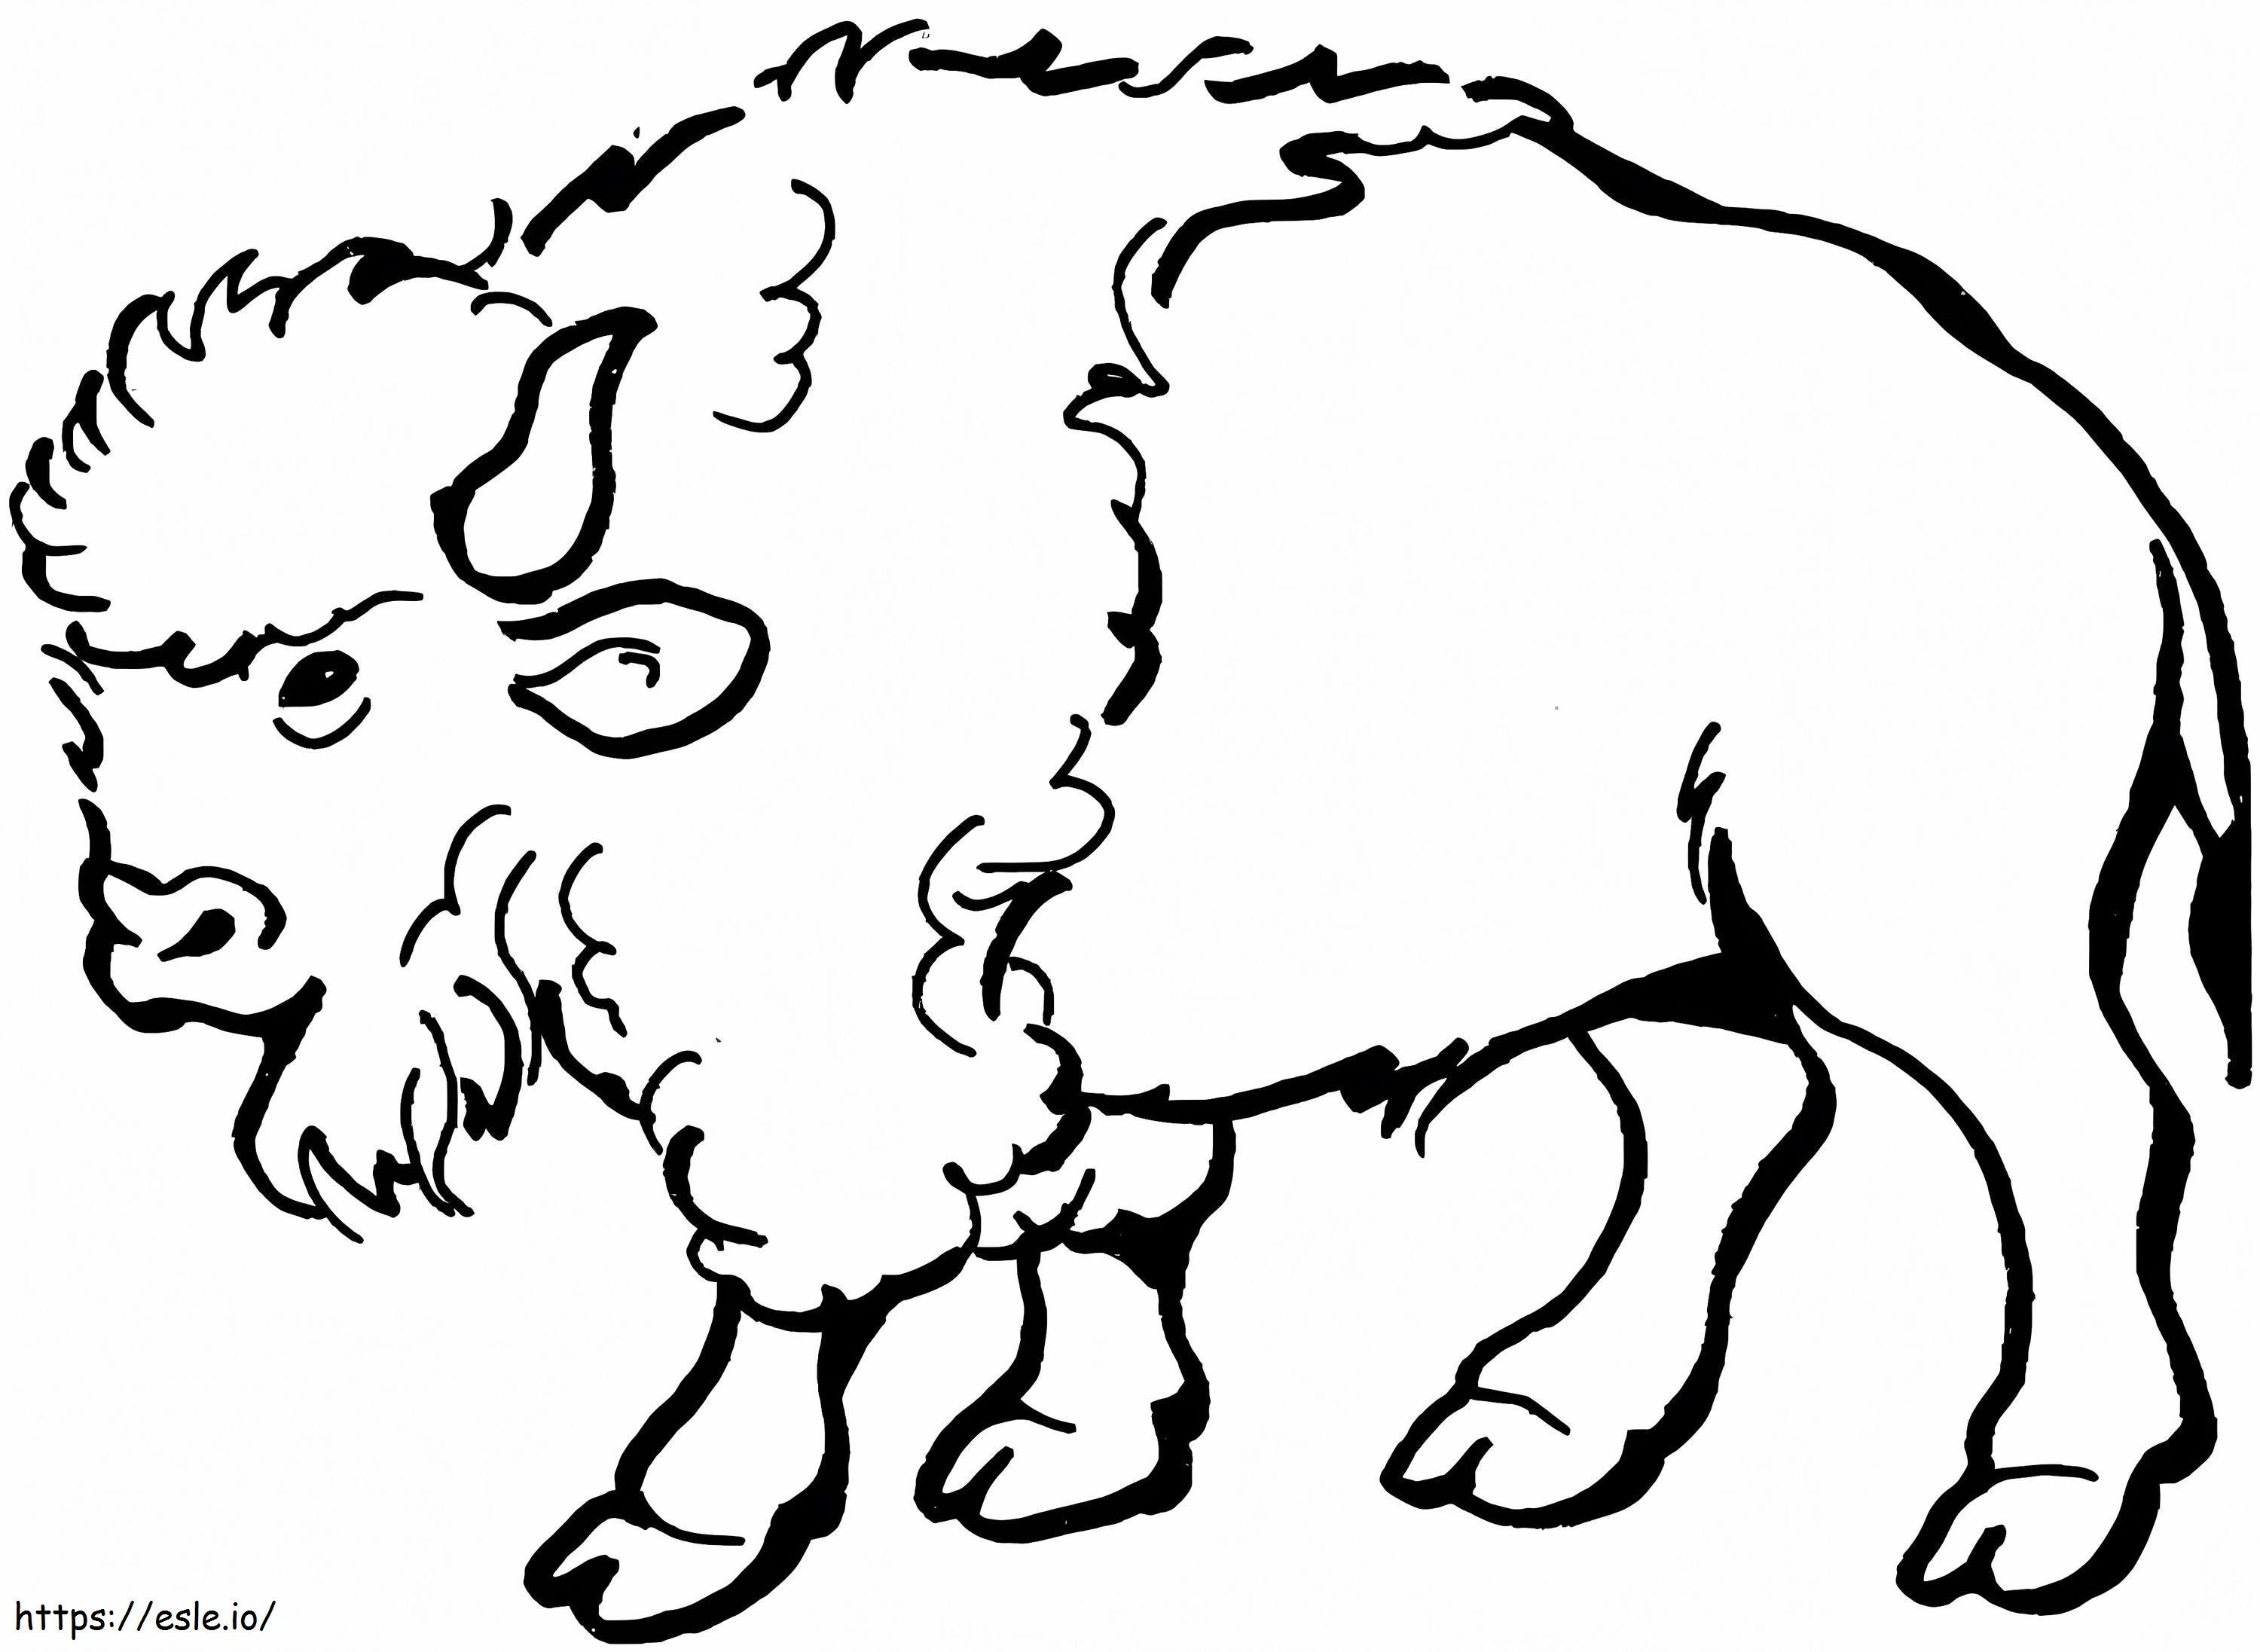 Normal Bison coloring page